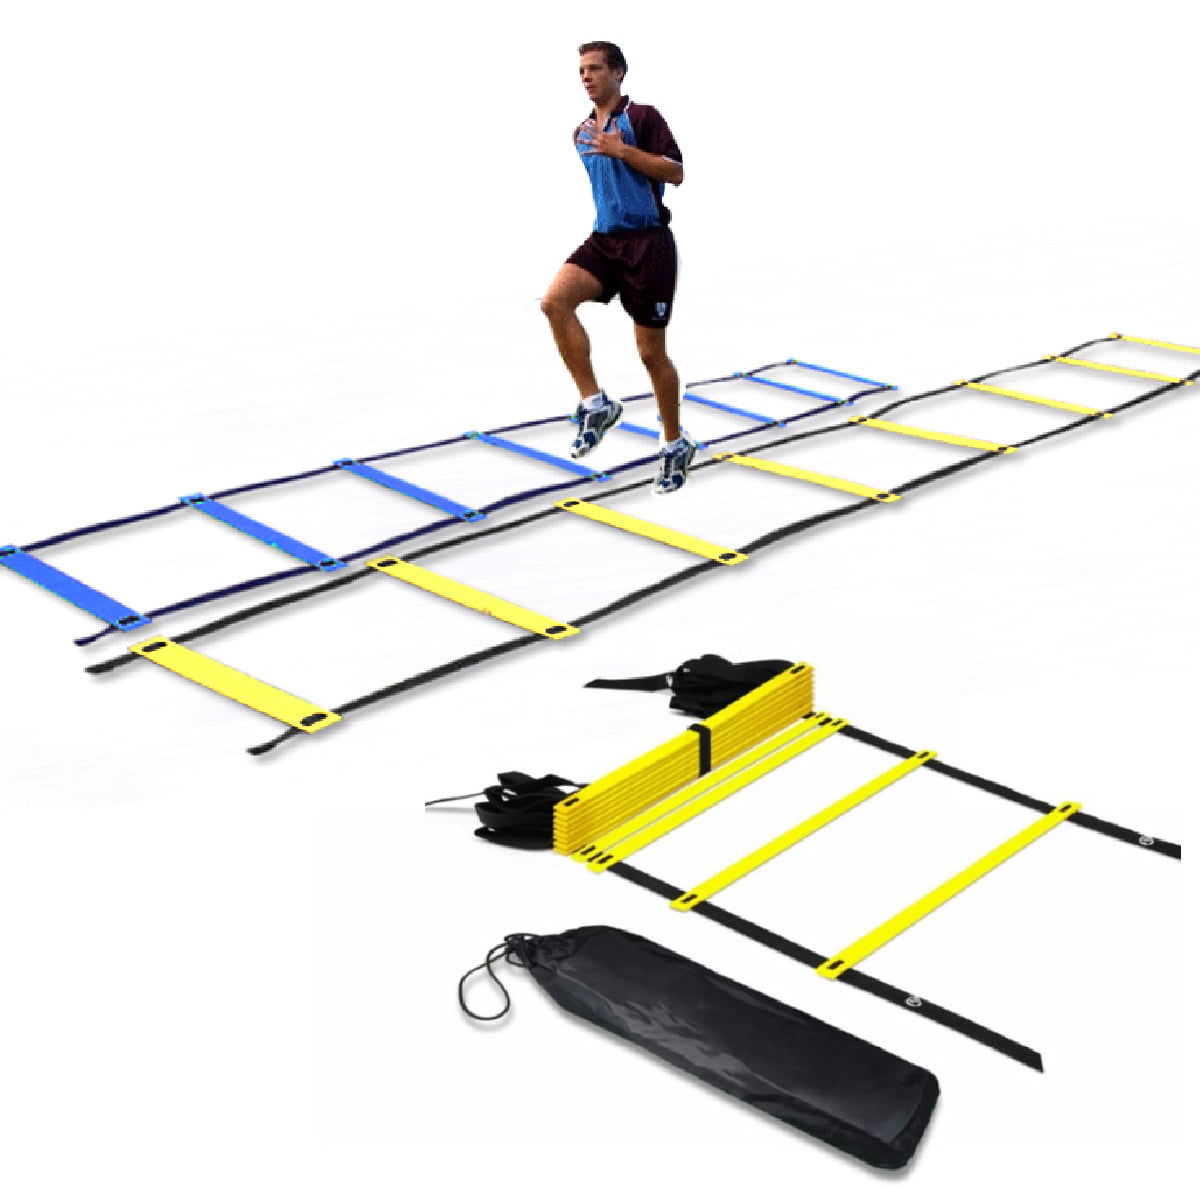 Gsi Speed Agility Ladder Track and Field Equipment for Sports Training and Soccer Football Tennis Baseball Drills 10 Rungs 